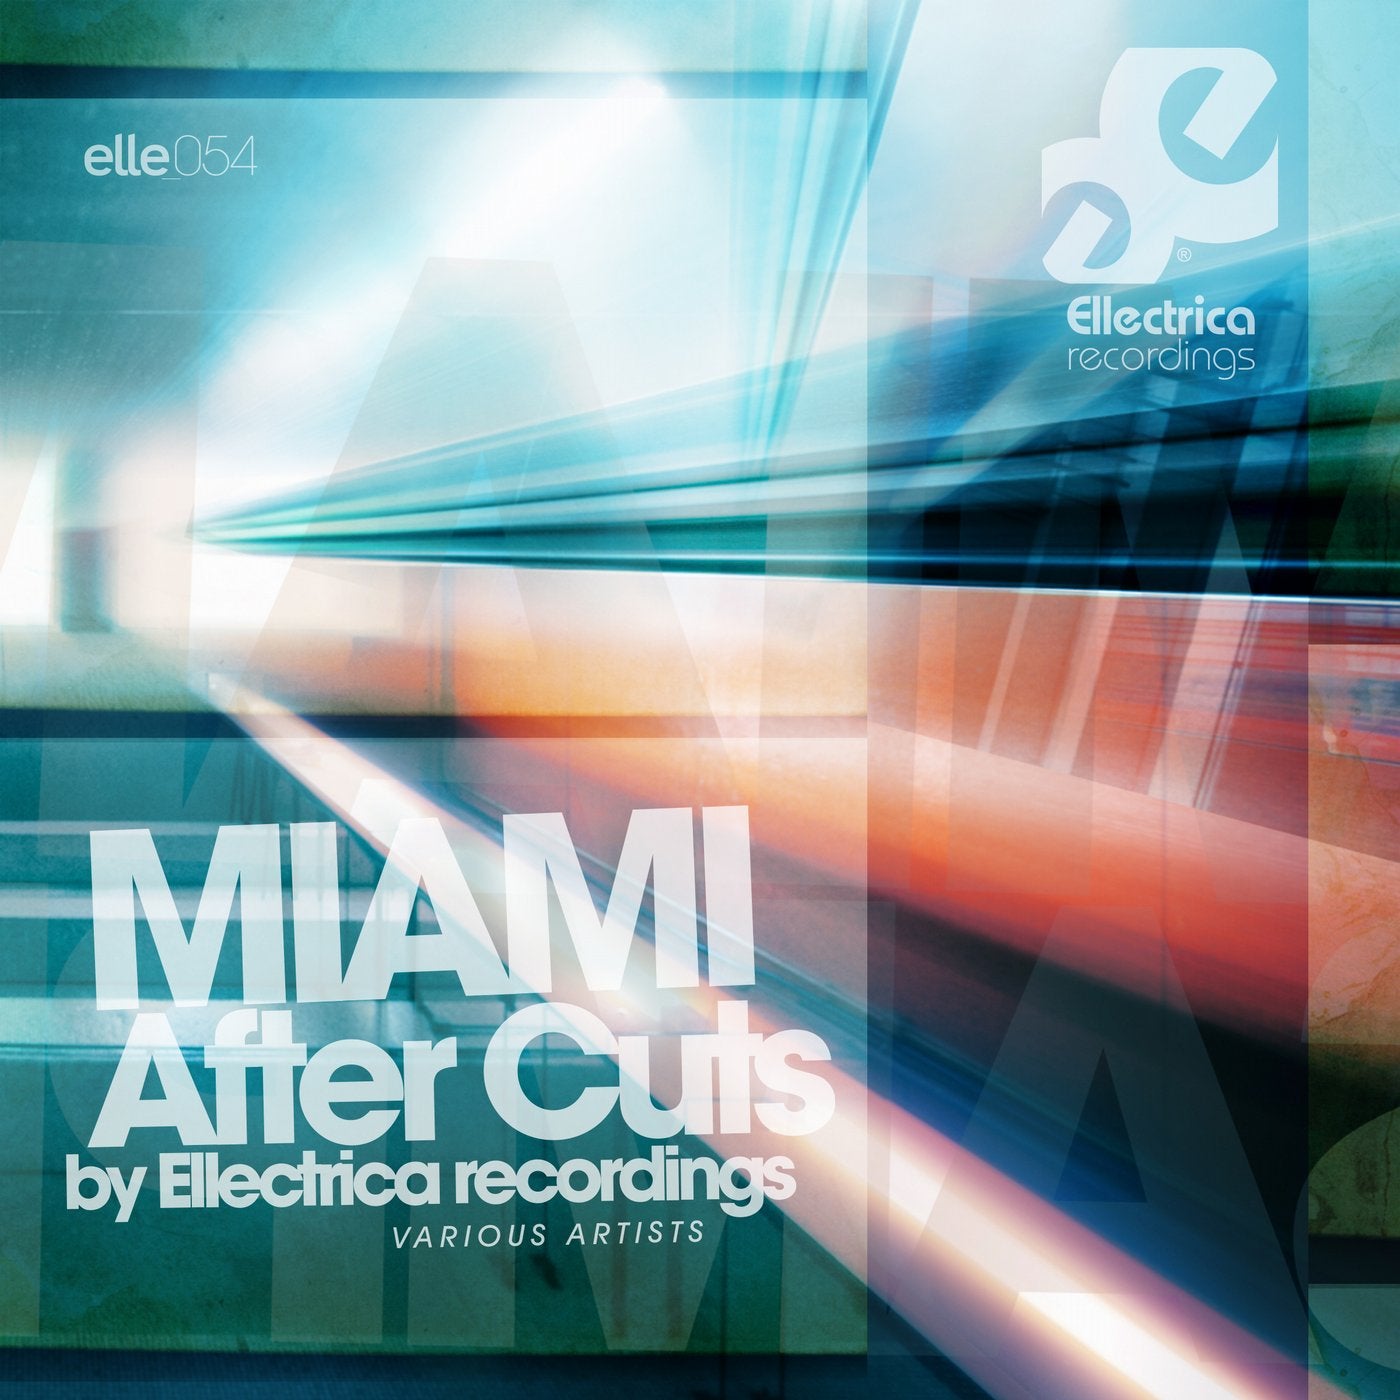 MIAMI After Cuts